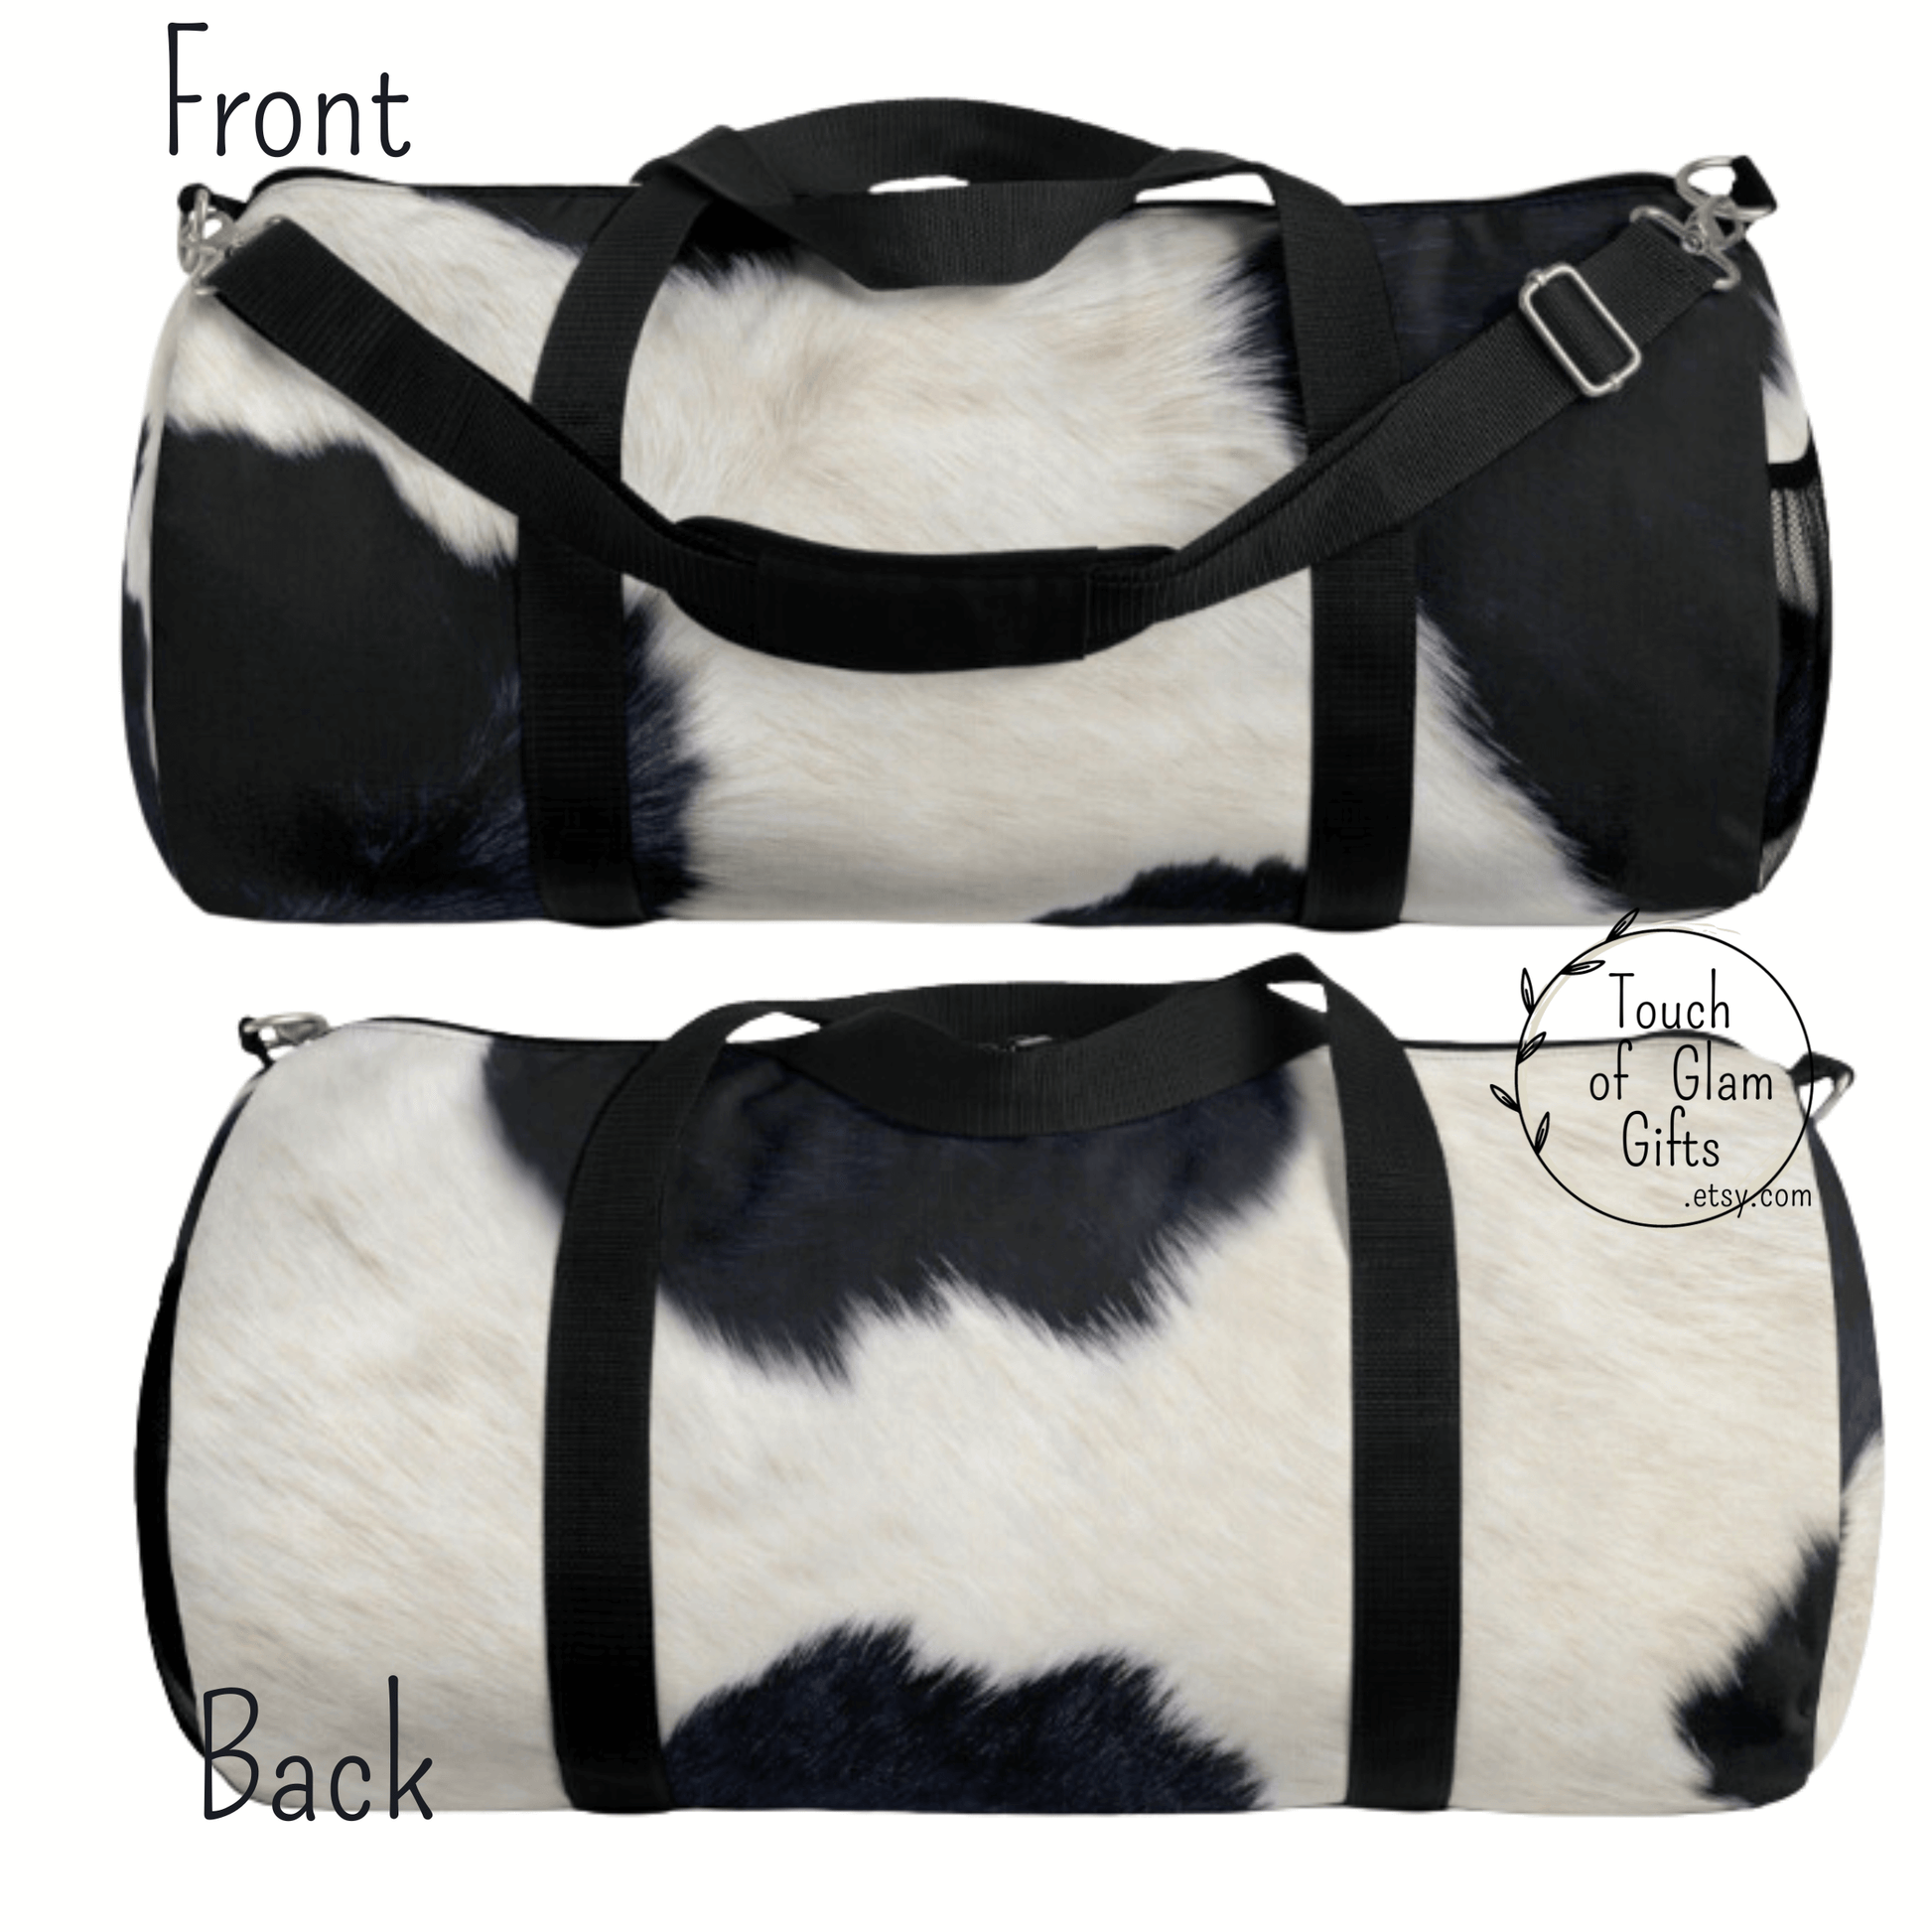 This picture shows the front of the duffel bag and the cow print pattern and the back side with the cow print.